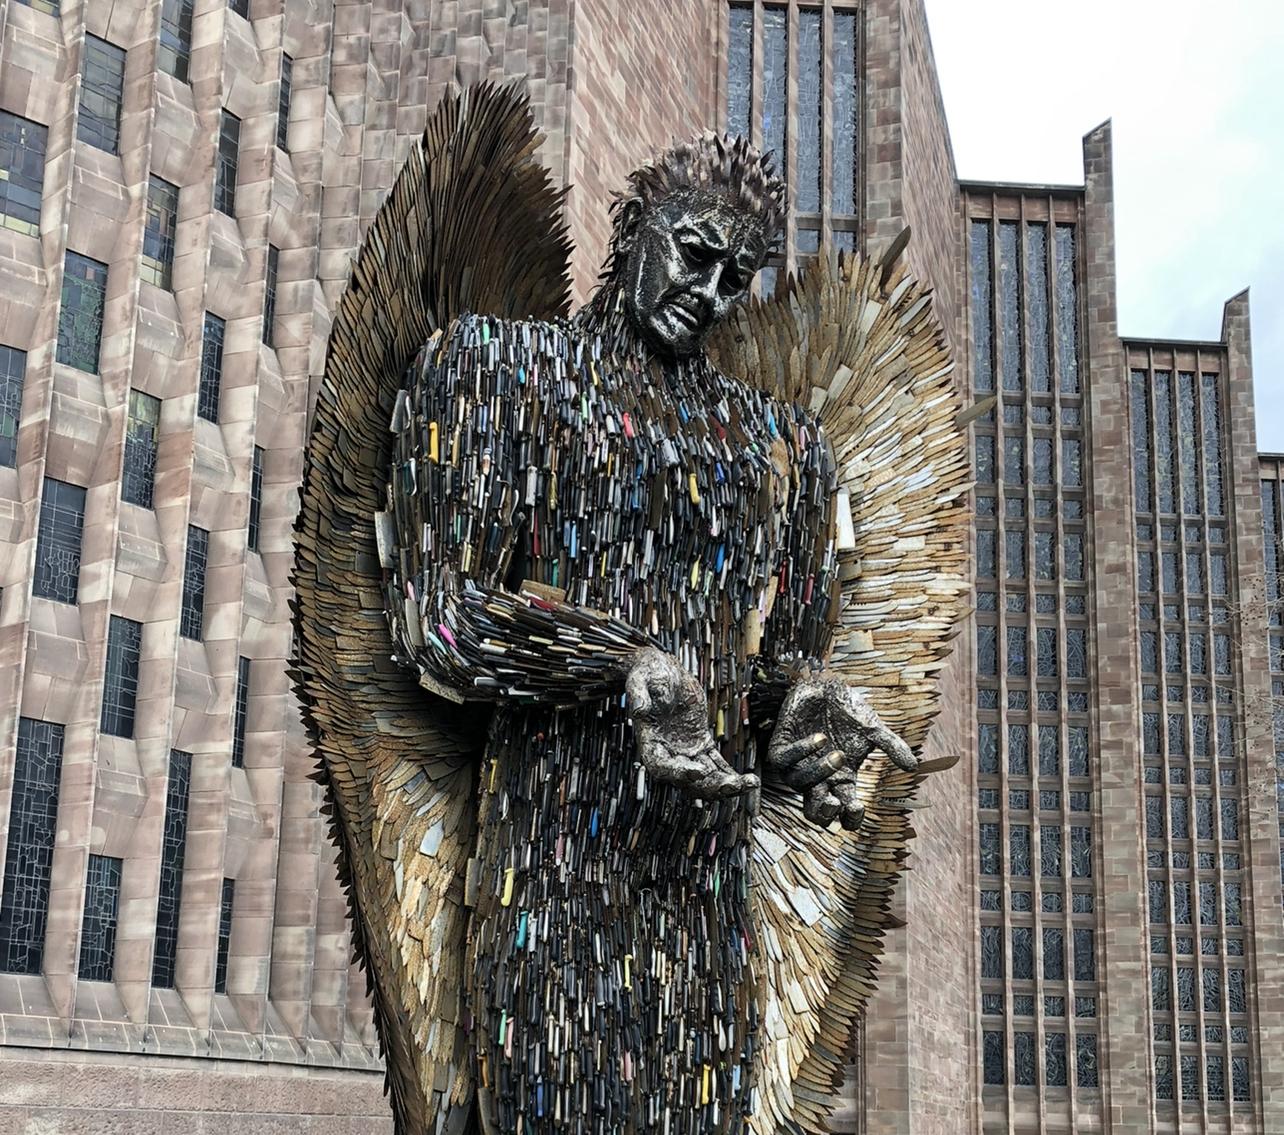 The Knife Angel by artist Alfie Bradley outside Coventry Cathedral.